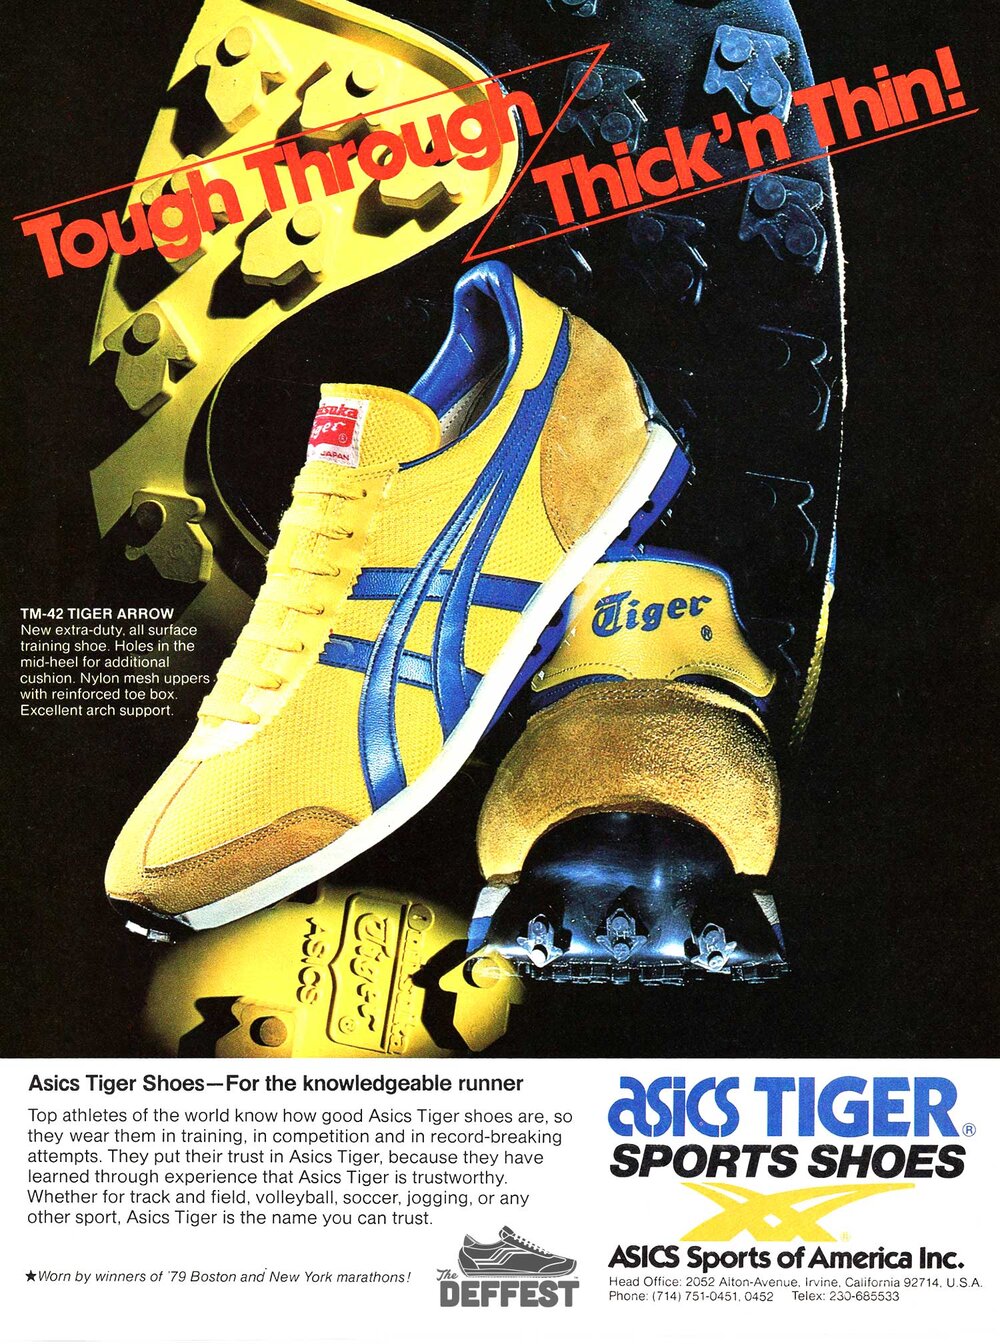 vintage asics tiger sneakers 1980s fashion — The Deffest®. A vintage and  retro sneaker blog. — Vintage Ads